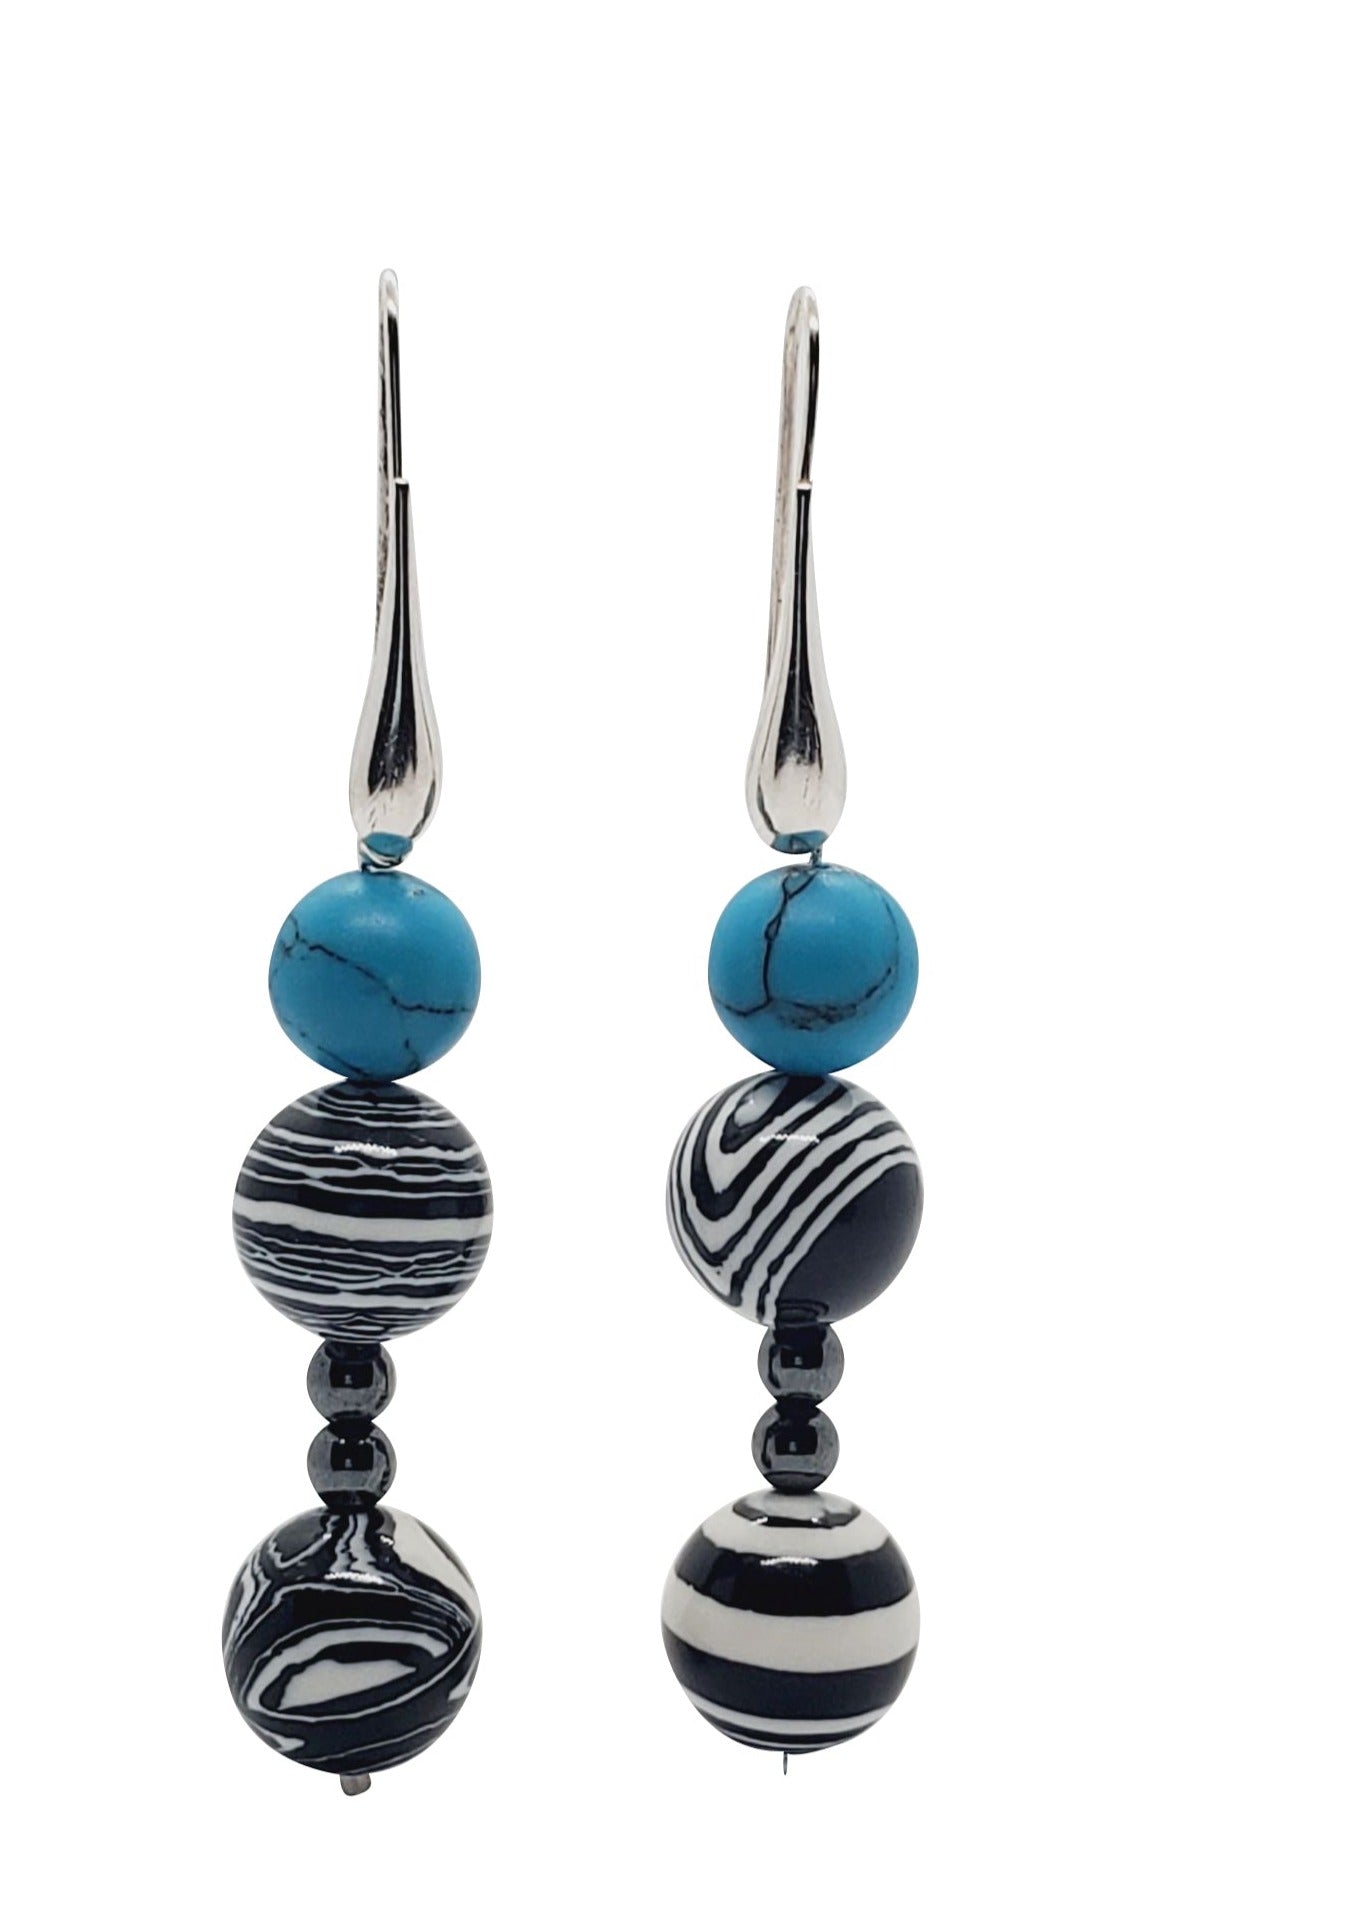 Photo of black and white earrings, Turquoise earrings, Robin Dangle Earrings, handmade earrings, earrings for women, earrings by Jiana Deon